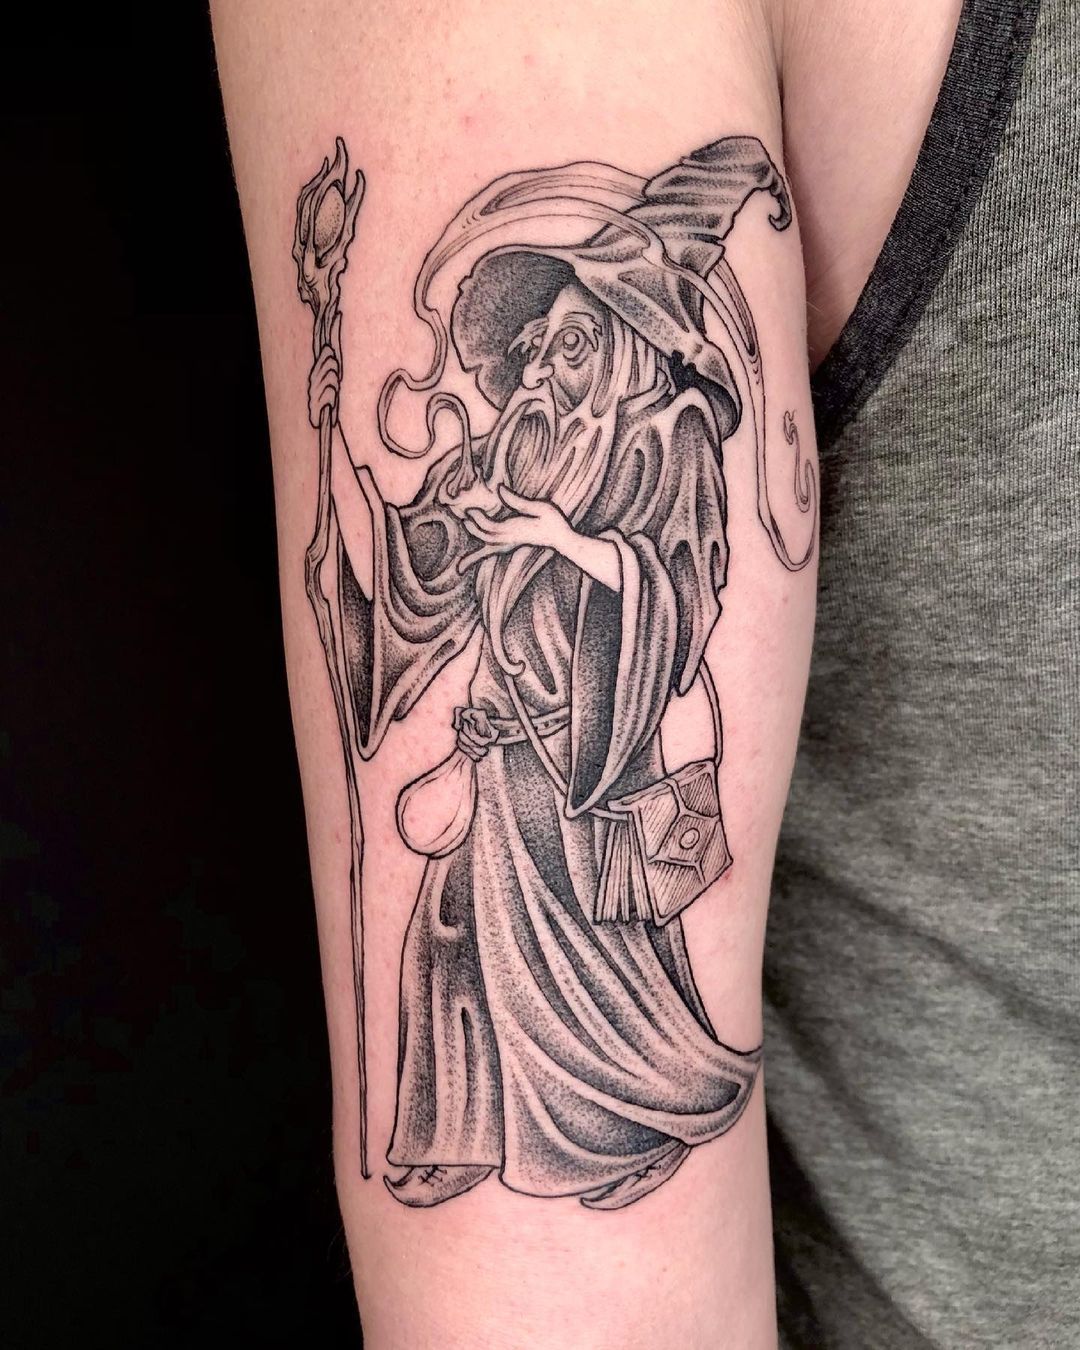 Wizard tattoo images